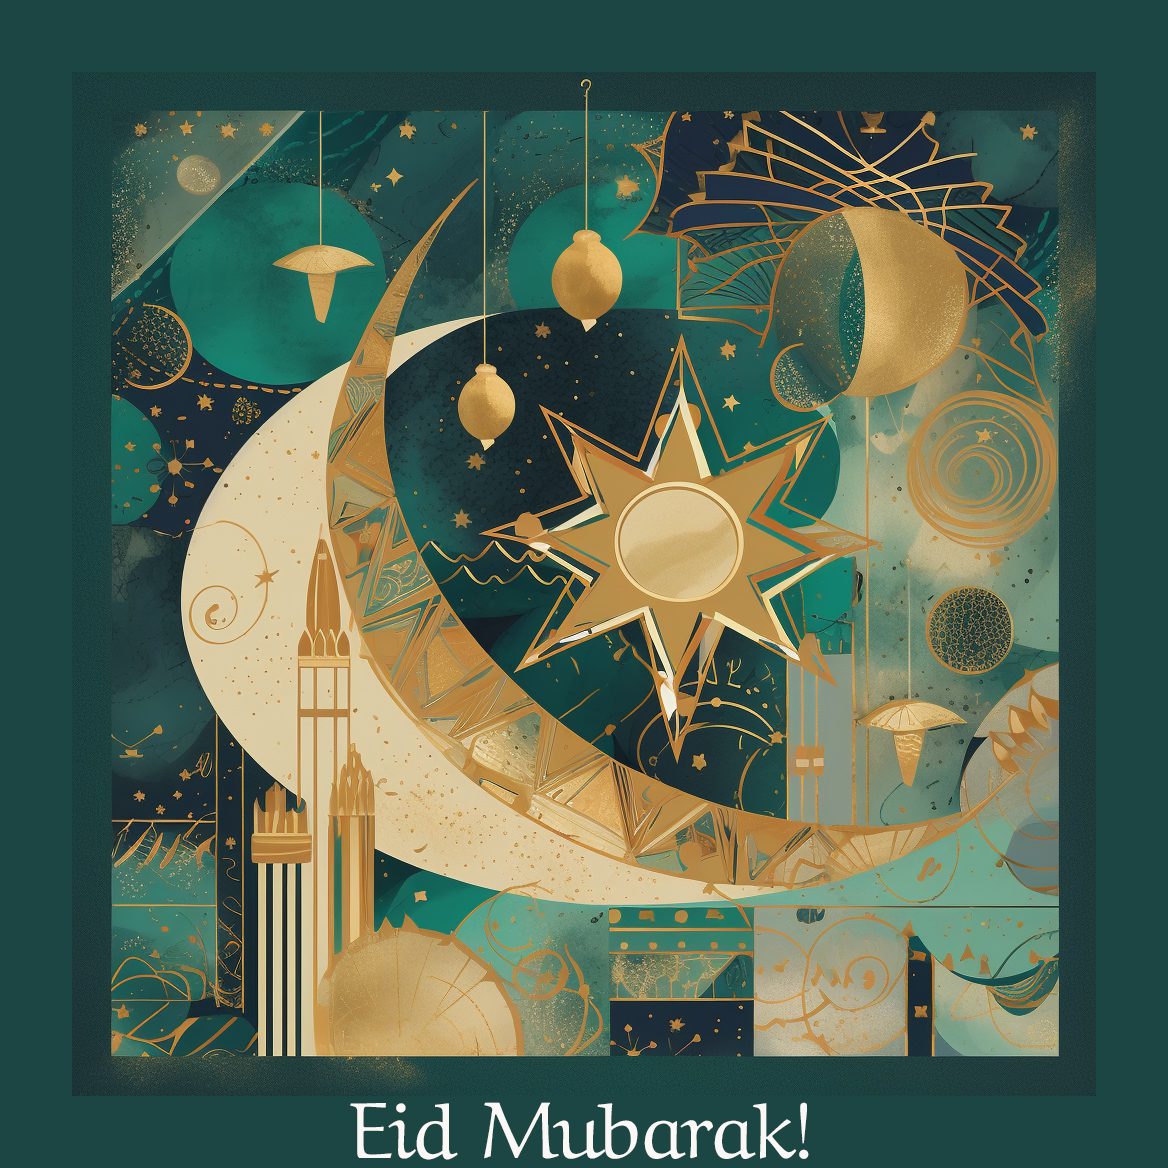 A vibrant, abstract Eid Mubarak illustration featuring a crescent moon, star, and festive elements in a warm and inviting color palette.